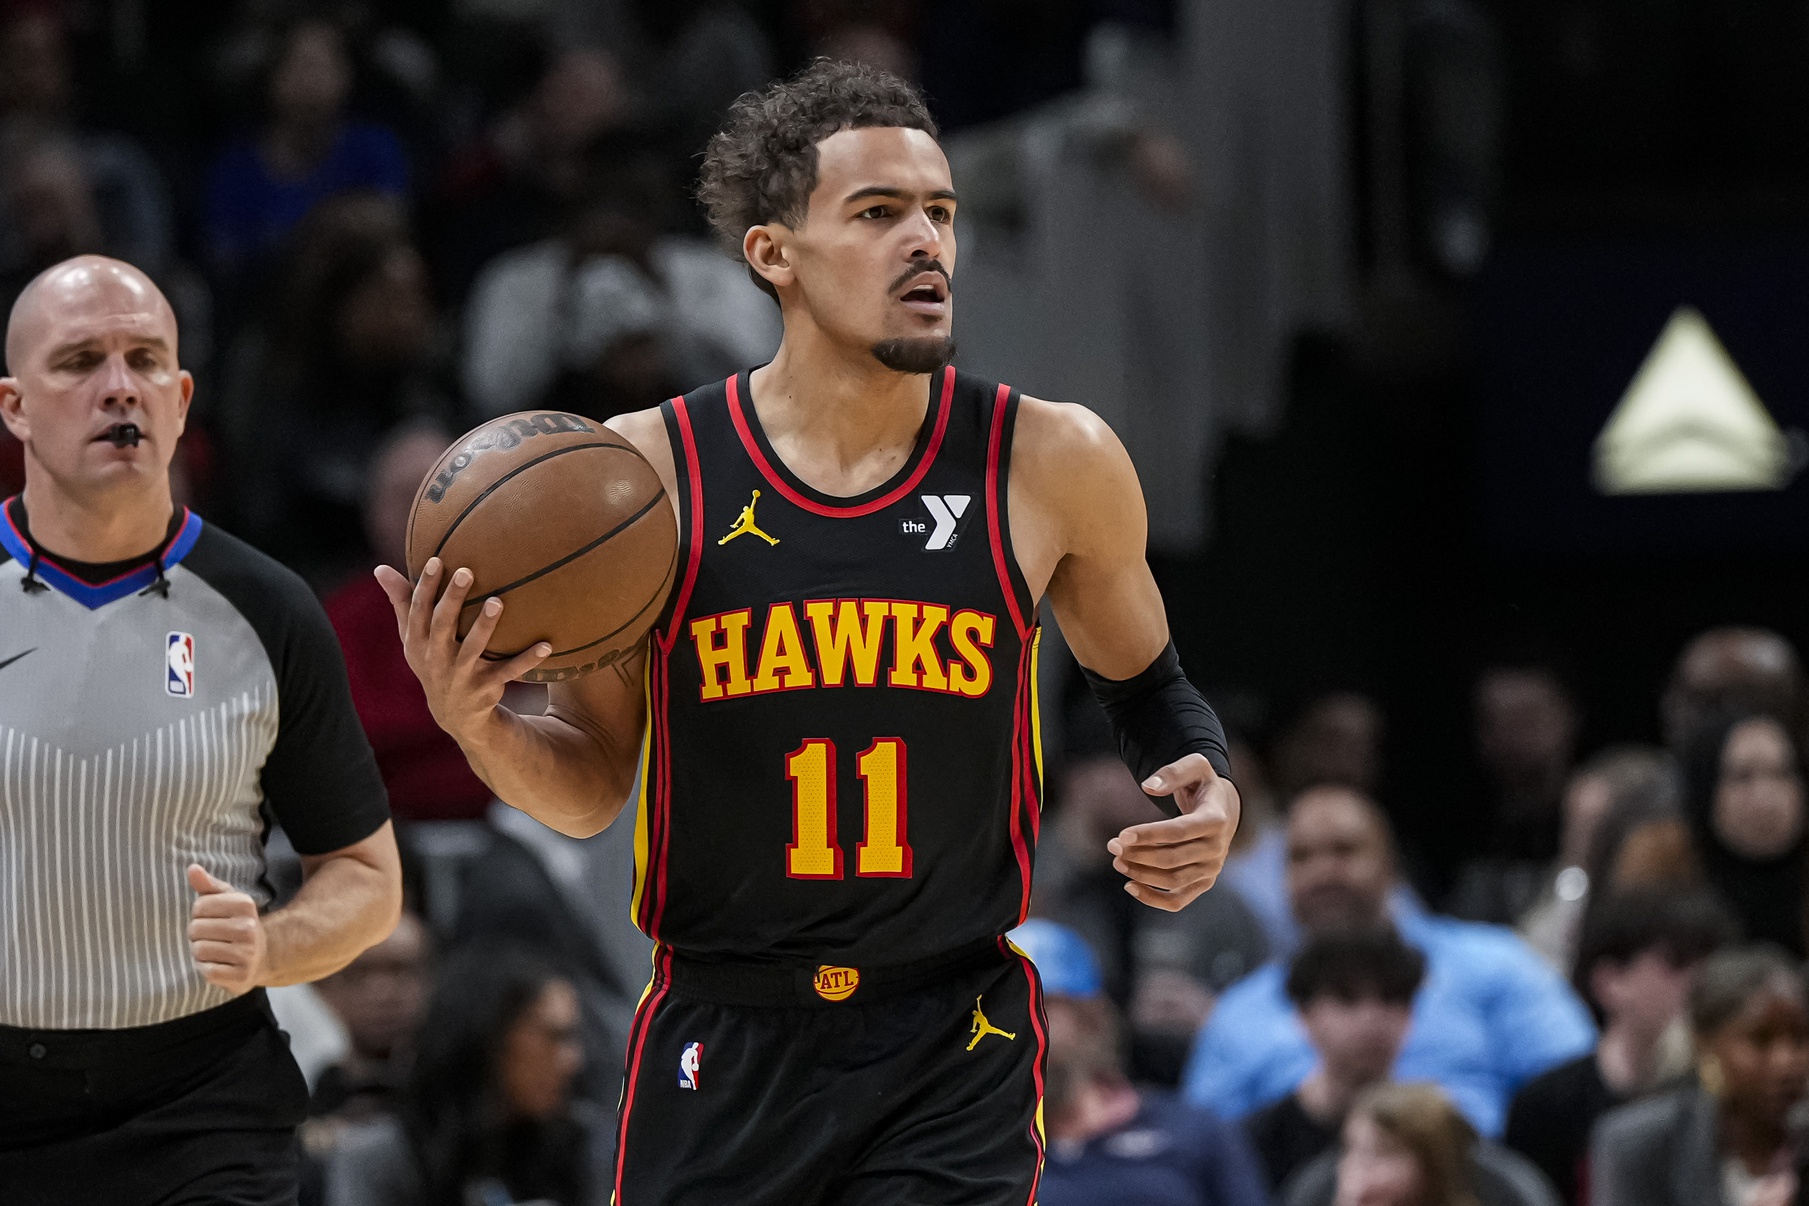 Atlanta Hawks guard Trae Young (11) brings the ball up the court against the LA Clippers during the first half at State Farm Arena.